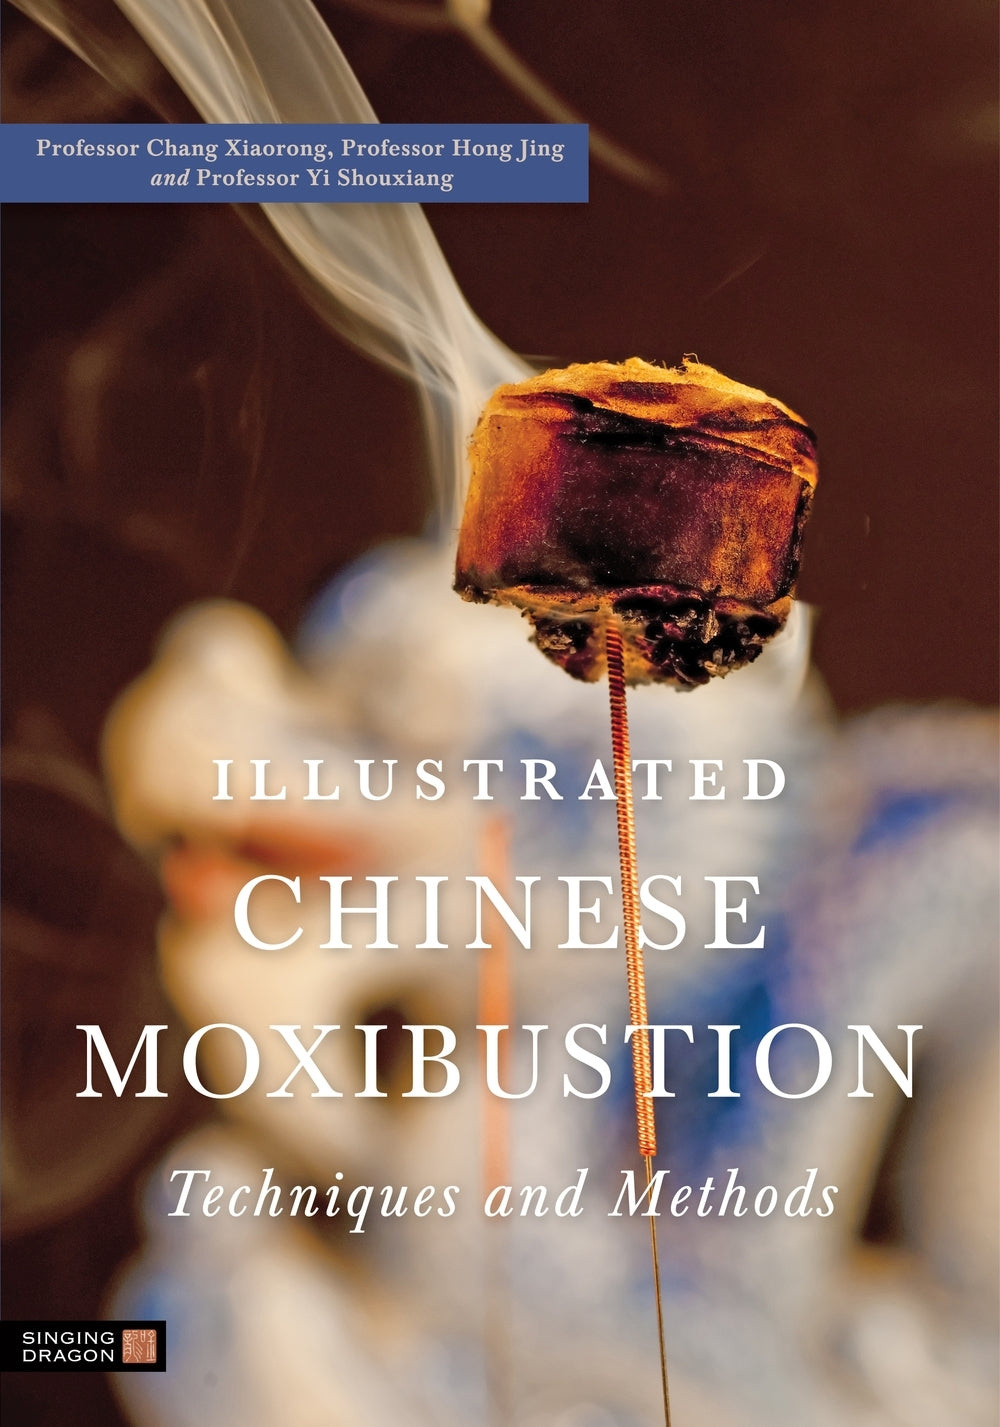 Illustrated Chinese Moxibustion Techniques and Methods by Xiaorong Chang